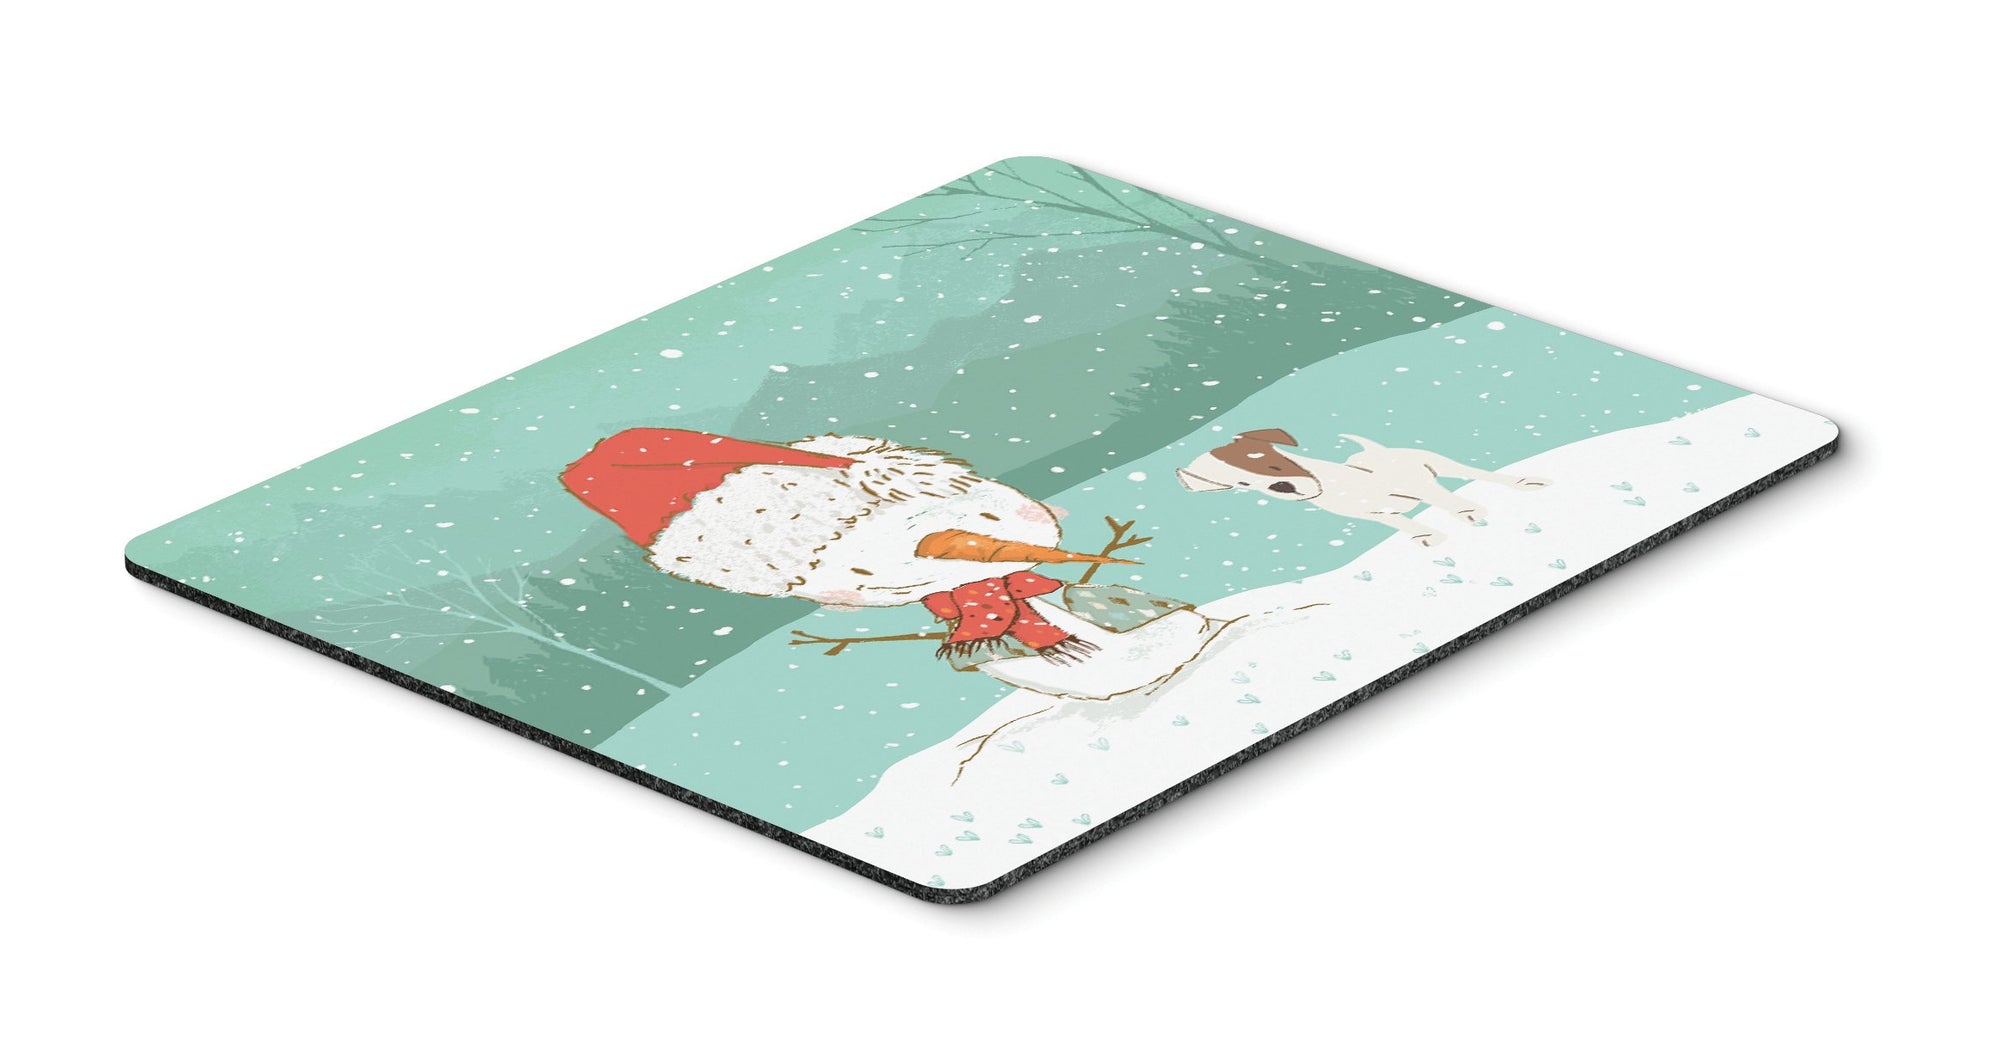 Jack Russell Terrier Snowman Christmas Mouse Pad, Hot Pad or Trivet CK2090MP by Caroline's Treasures